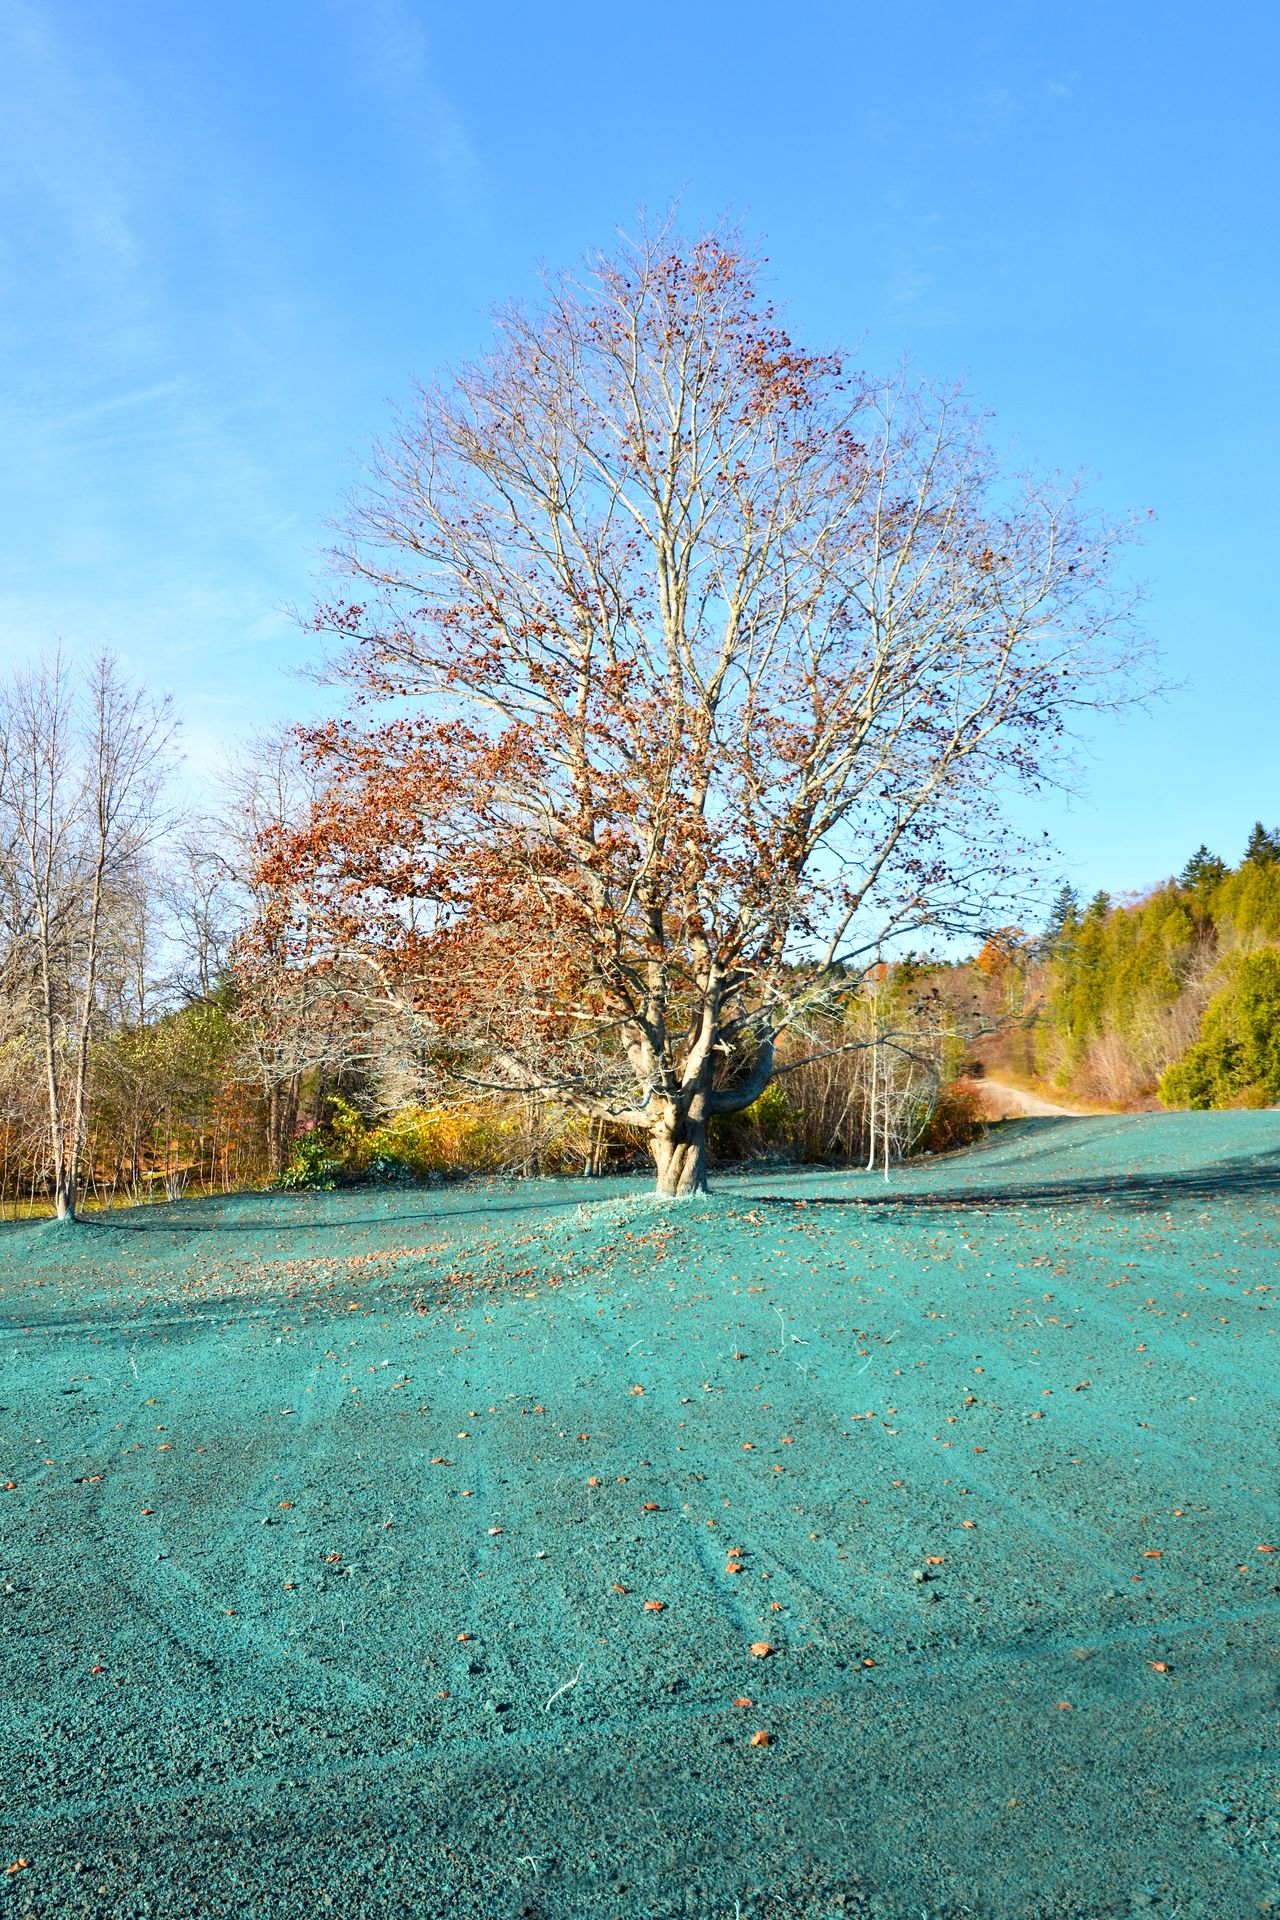 Hydroseeding uses a slurry of organic compounds designed to promote seed growth